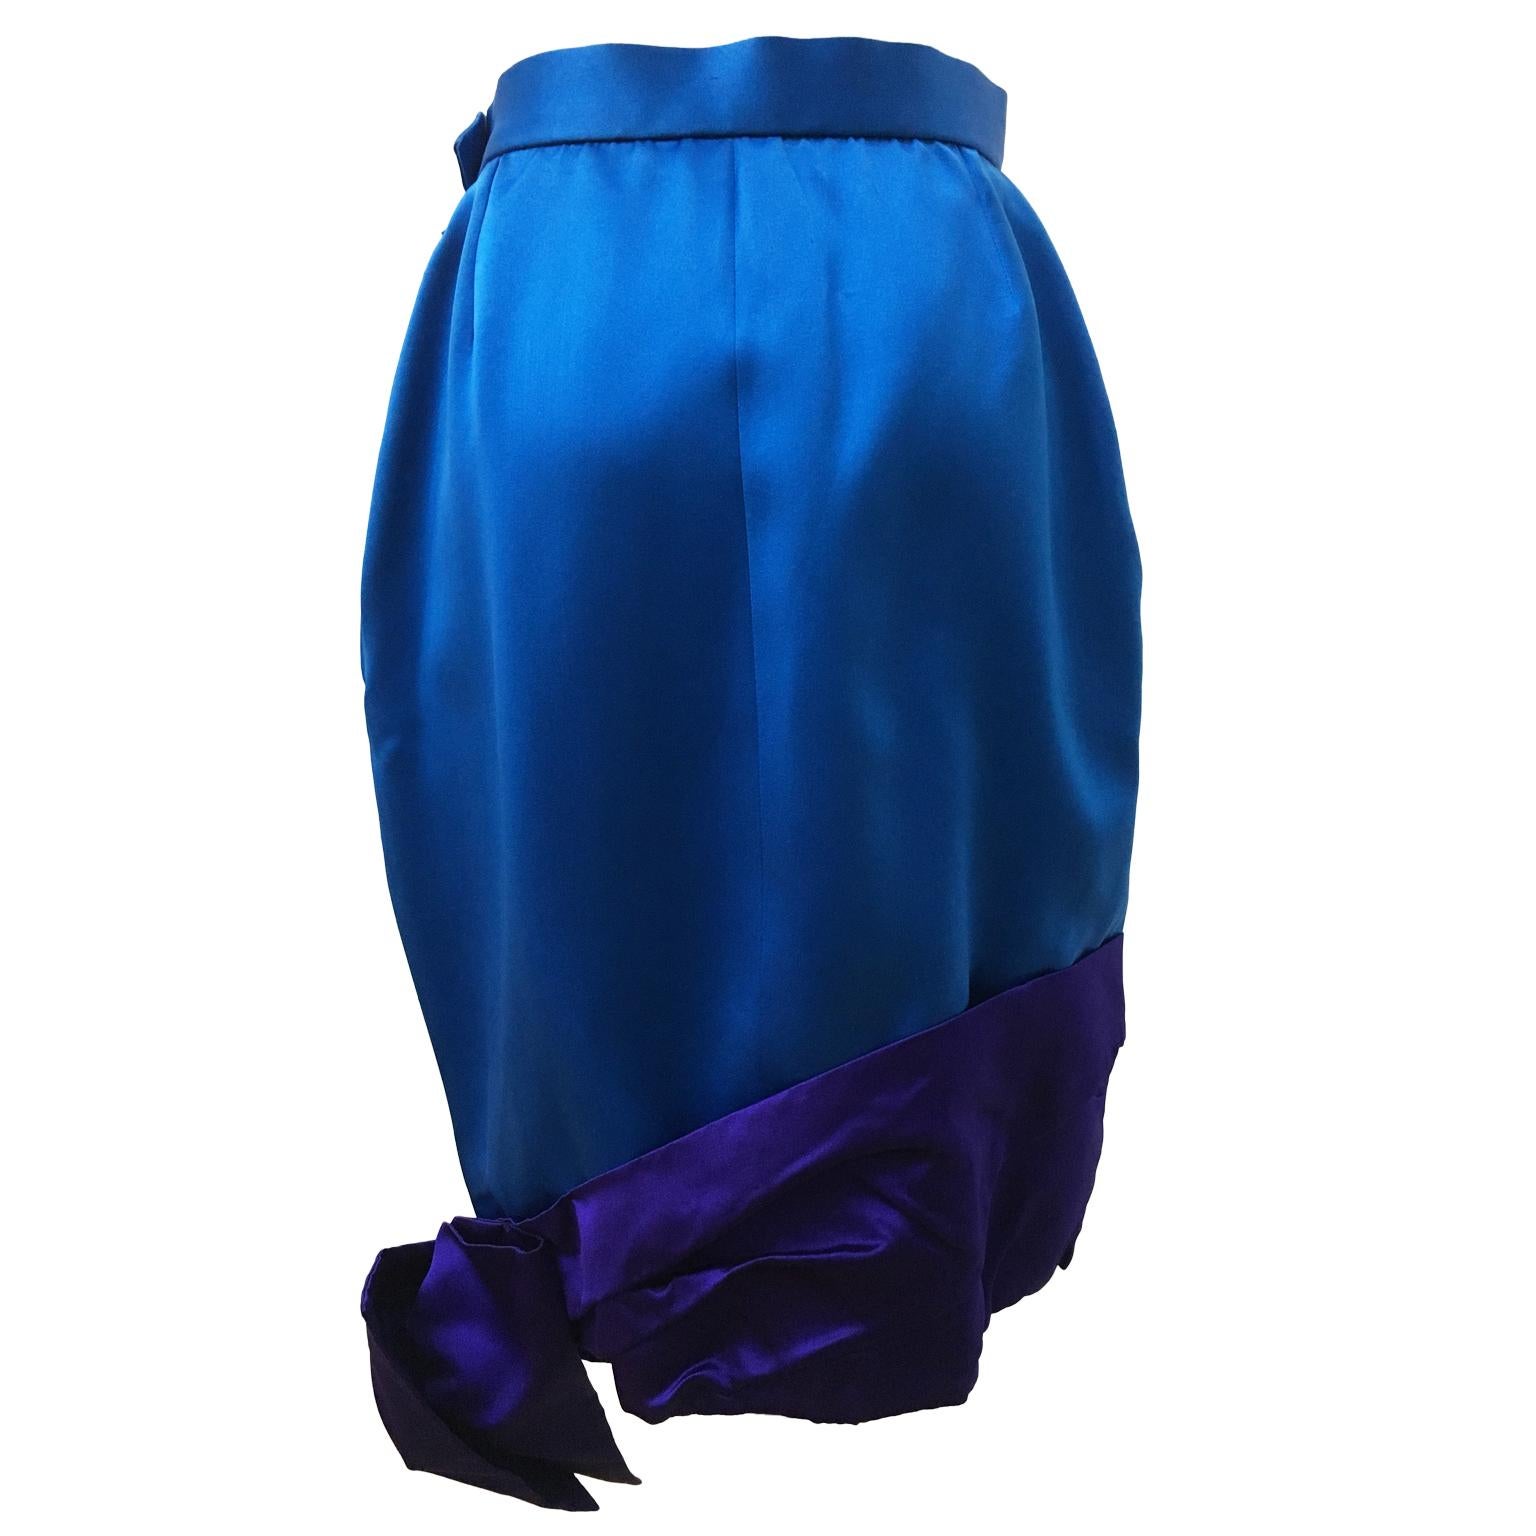 YSL Rive Gauche Bicolour Royal Blue Satin Skirt With Bow circa 1985 In New Condition For Sale In Berlin, DE